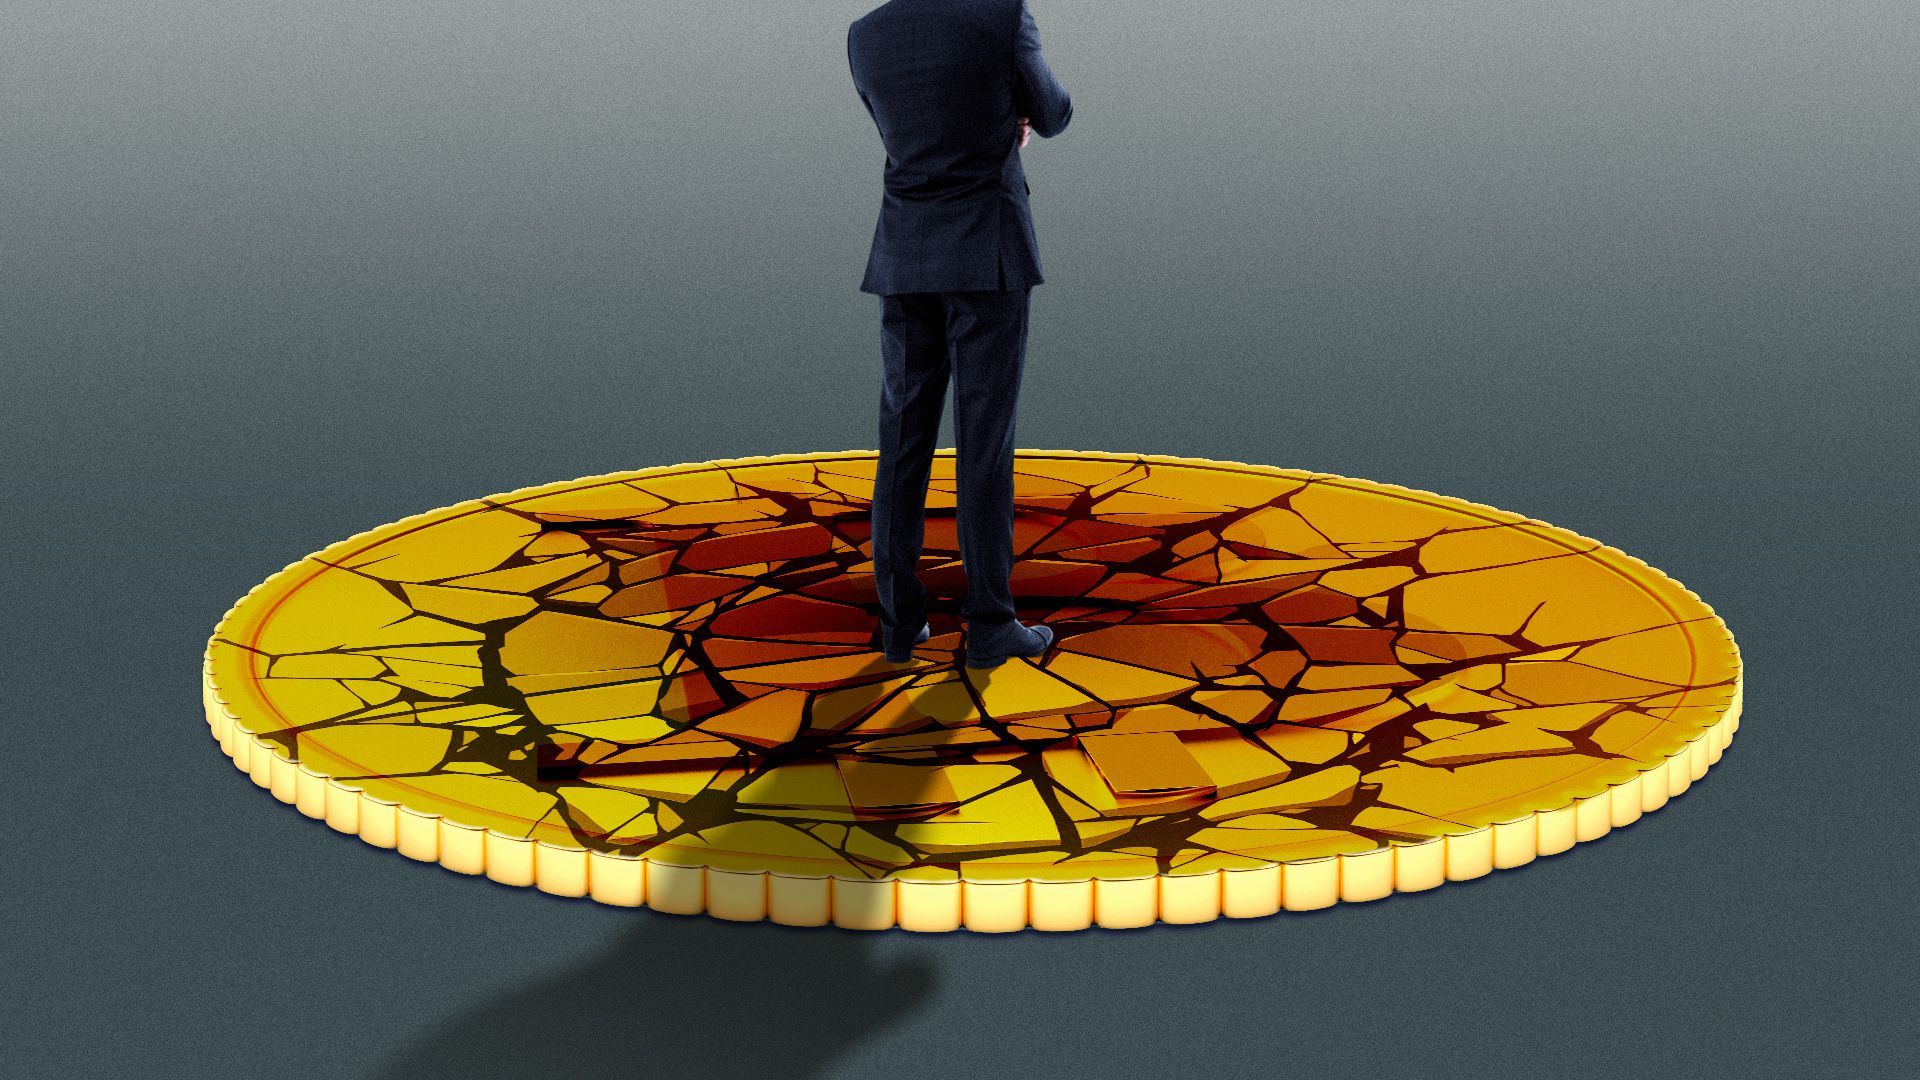 Illustration of a business person standing on a crumbling cryptocoin.